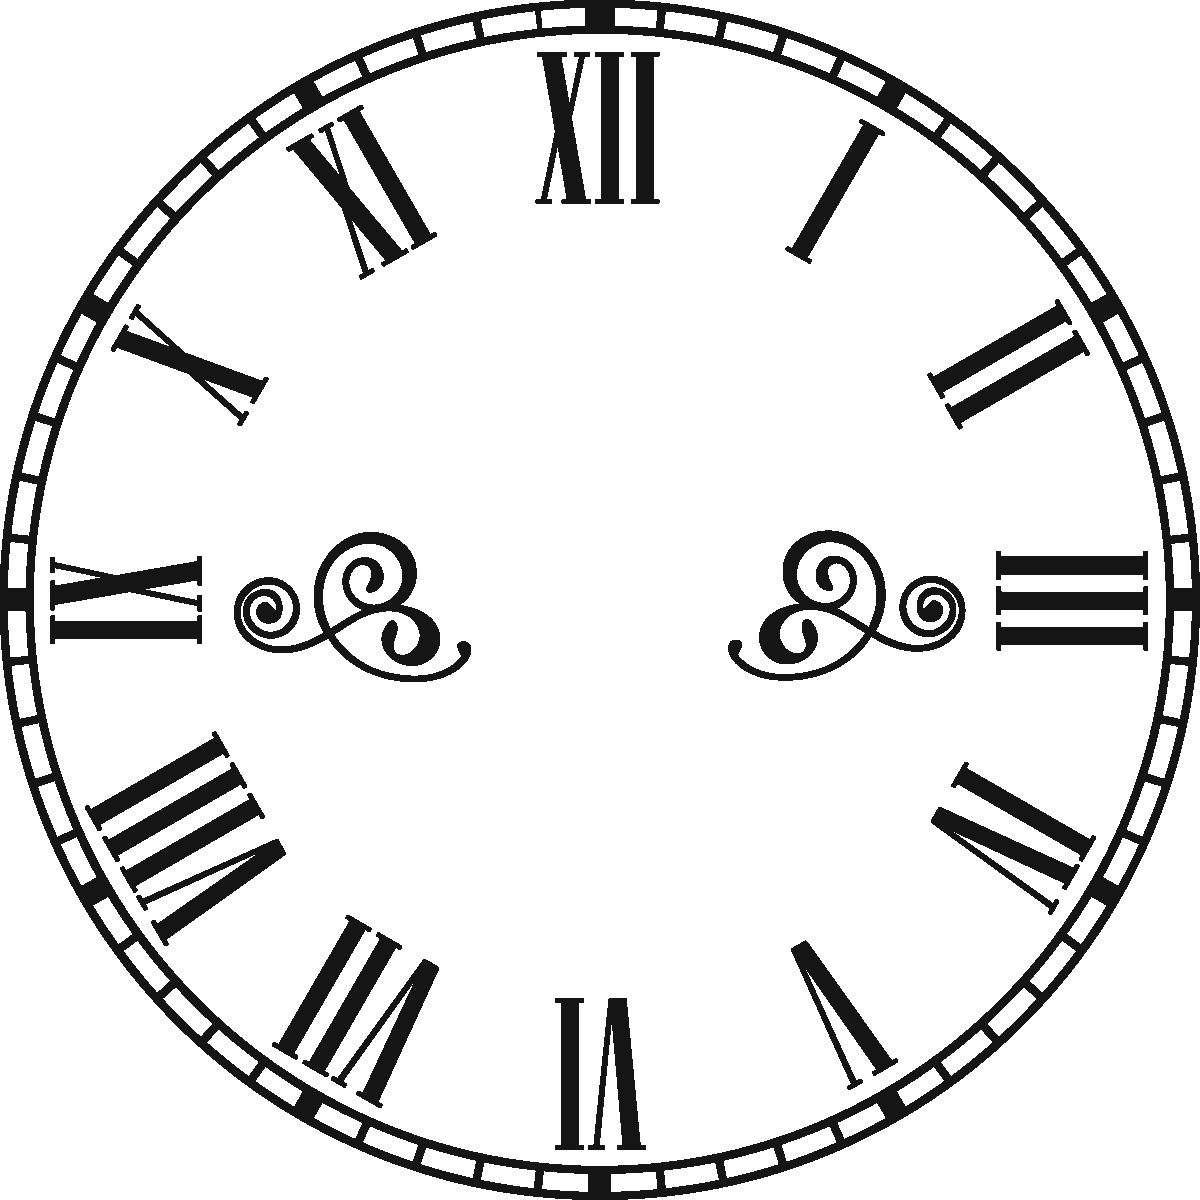 Numerals Art Clock Face Roman Angle Line PNG Image